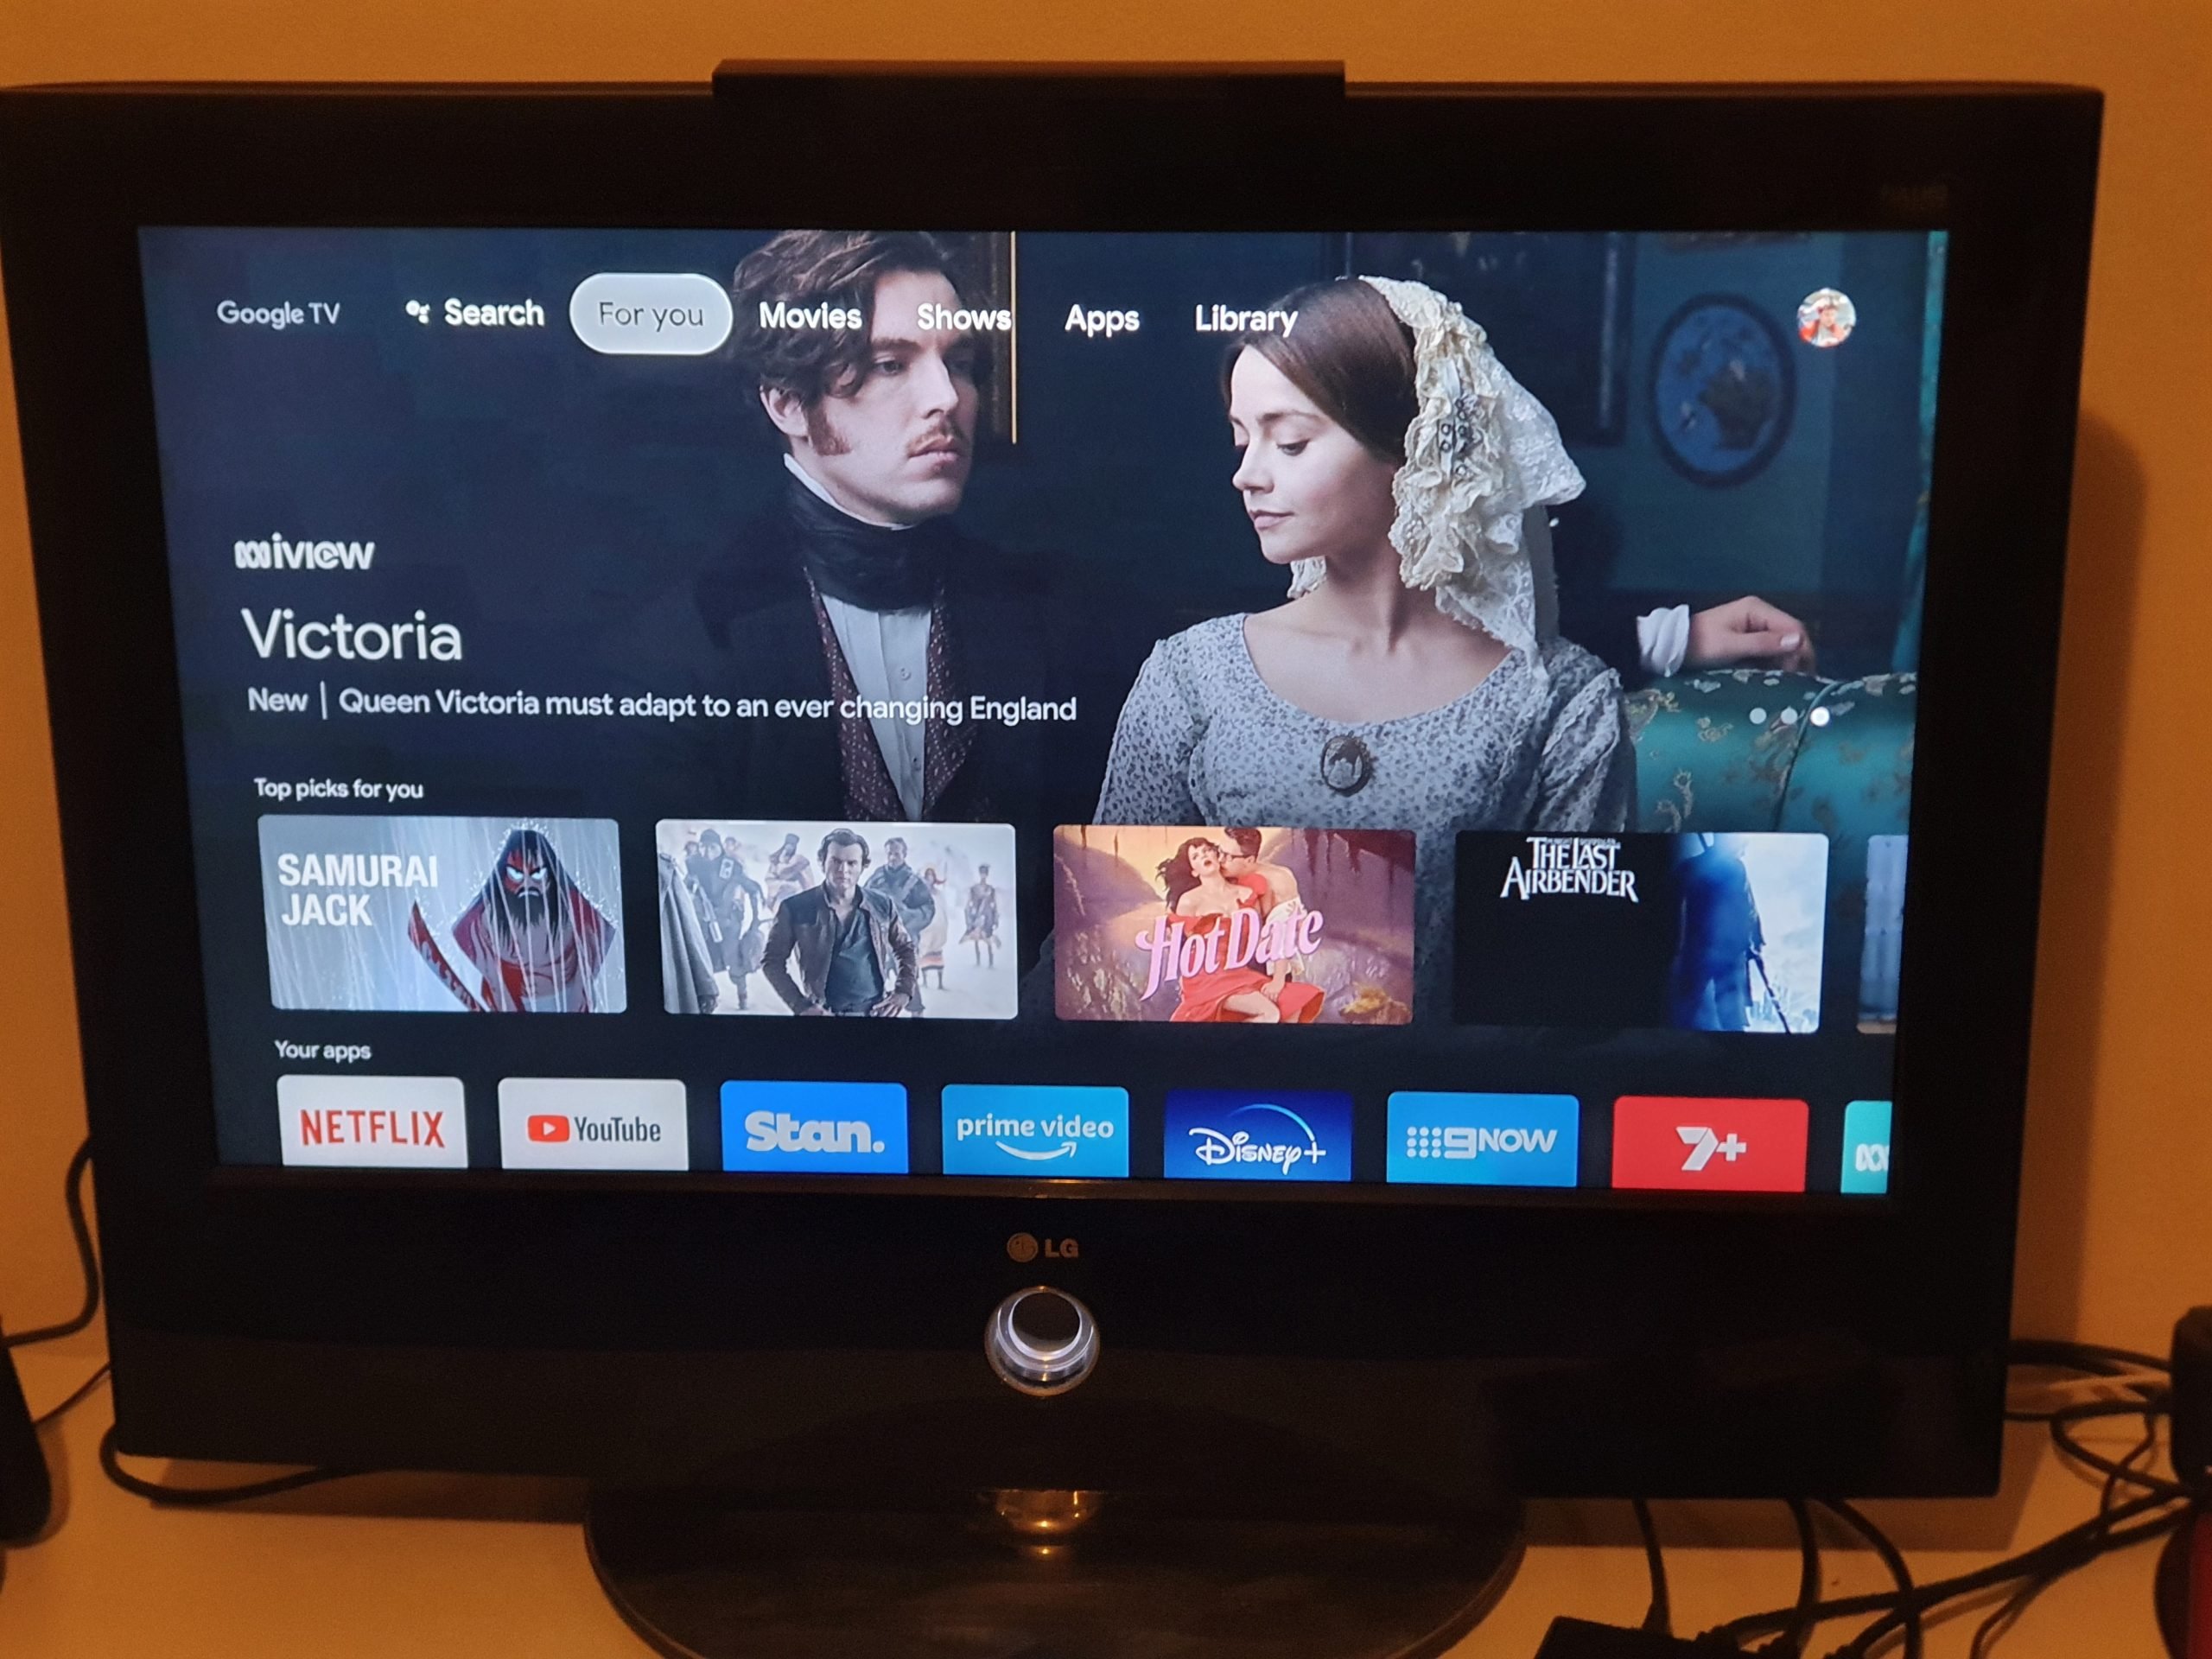 20201101 193033 scaled REVIEW: New Chromecast Adds Smart TV At A Smart Price